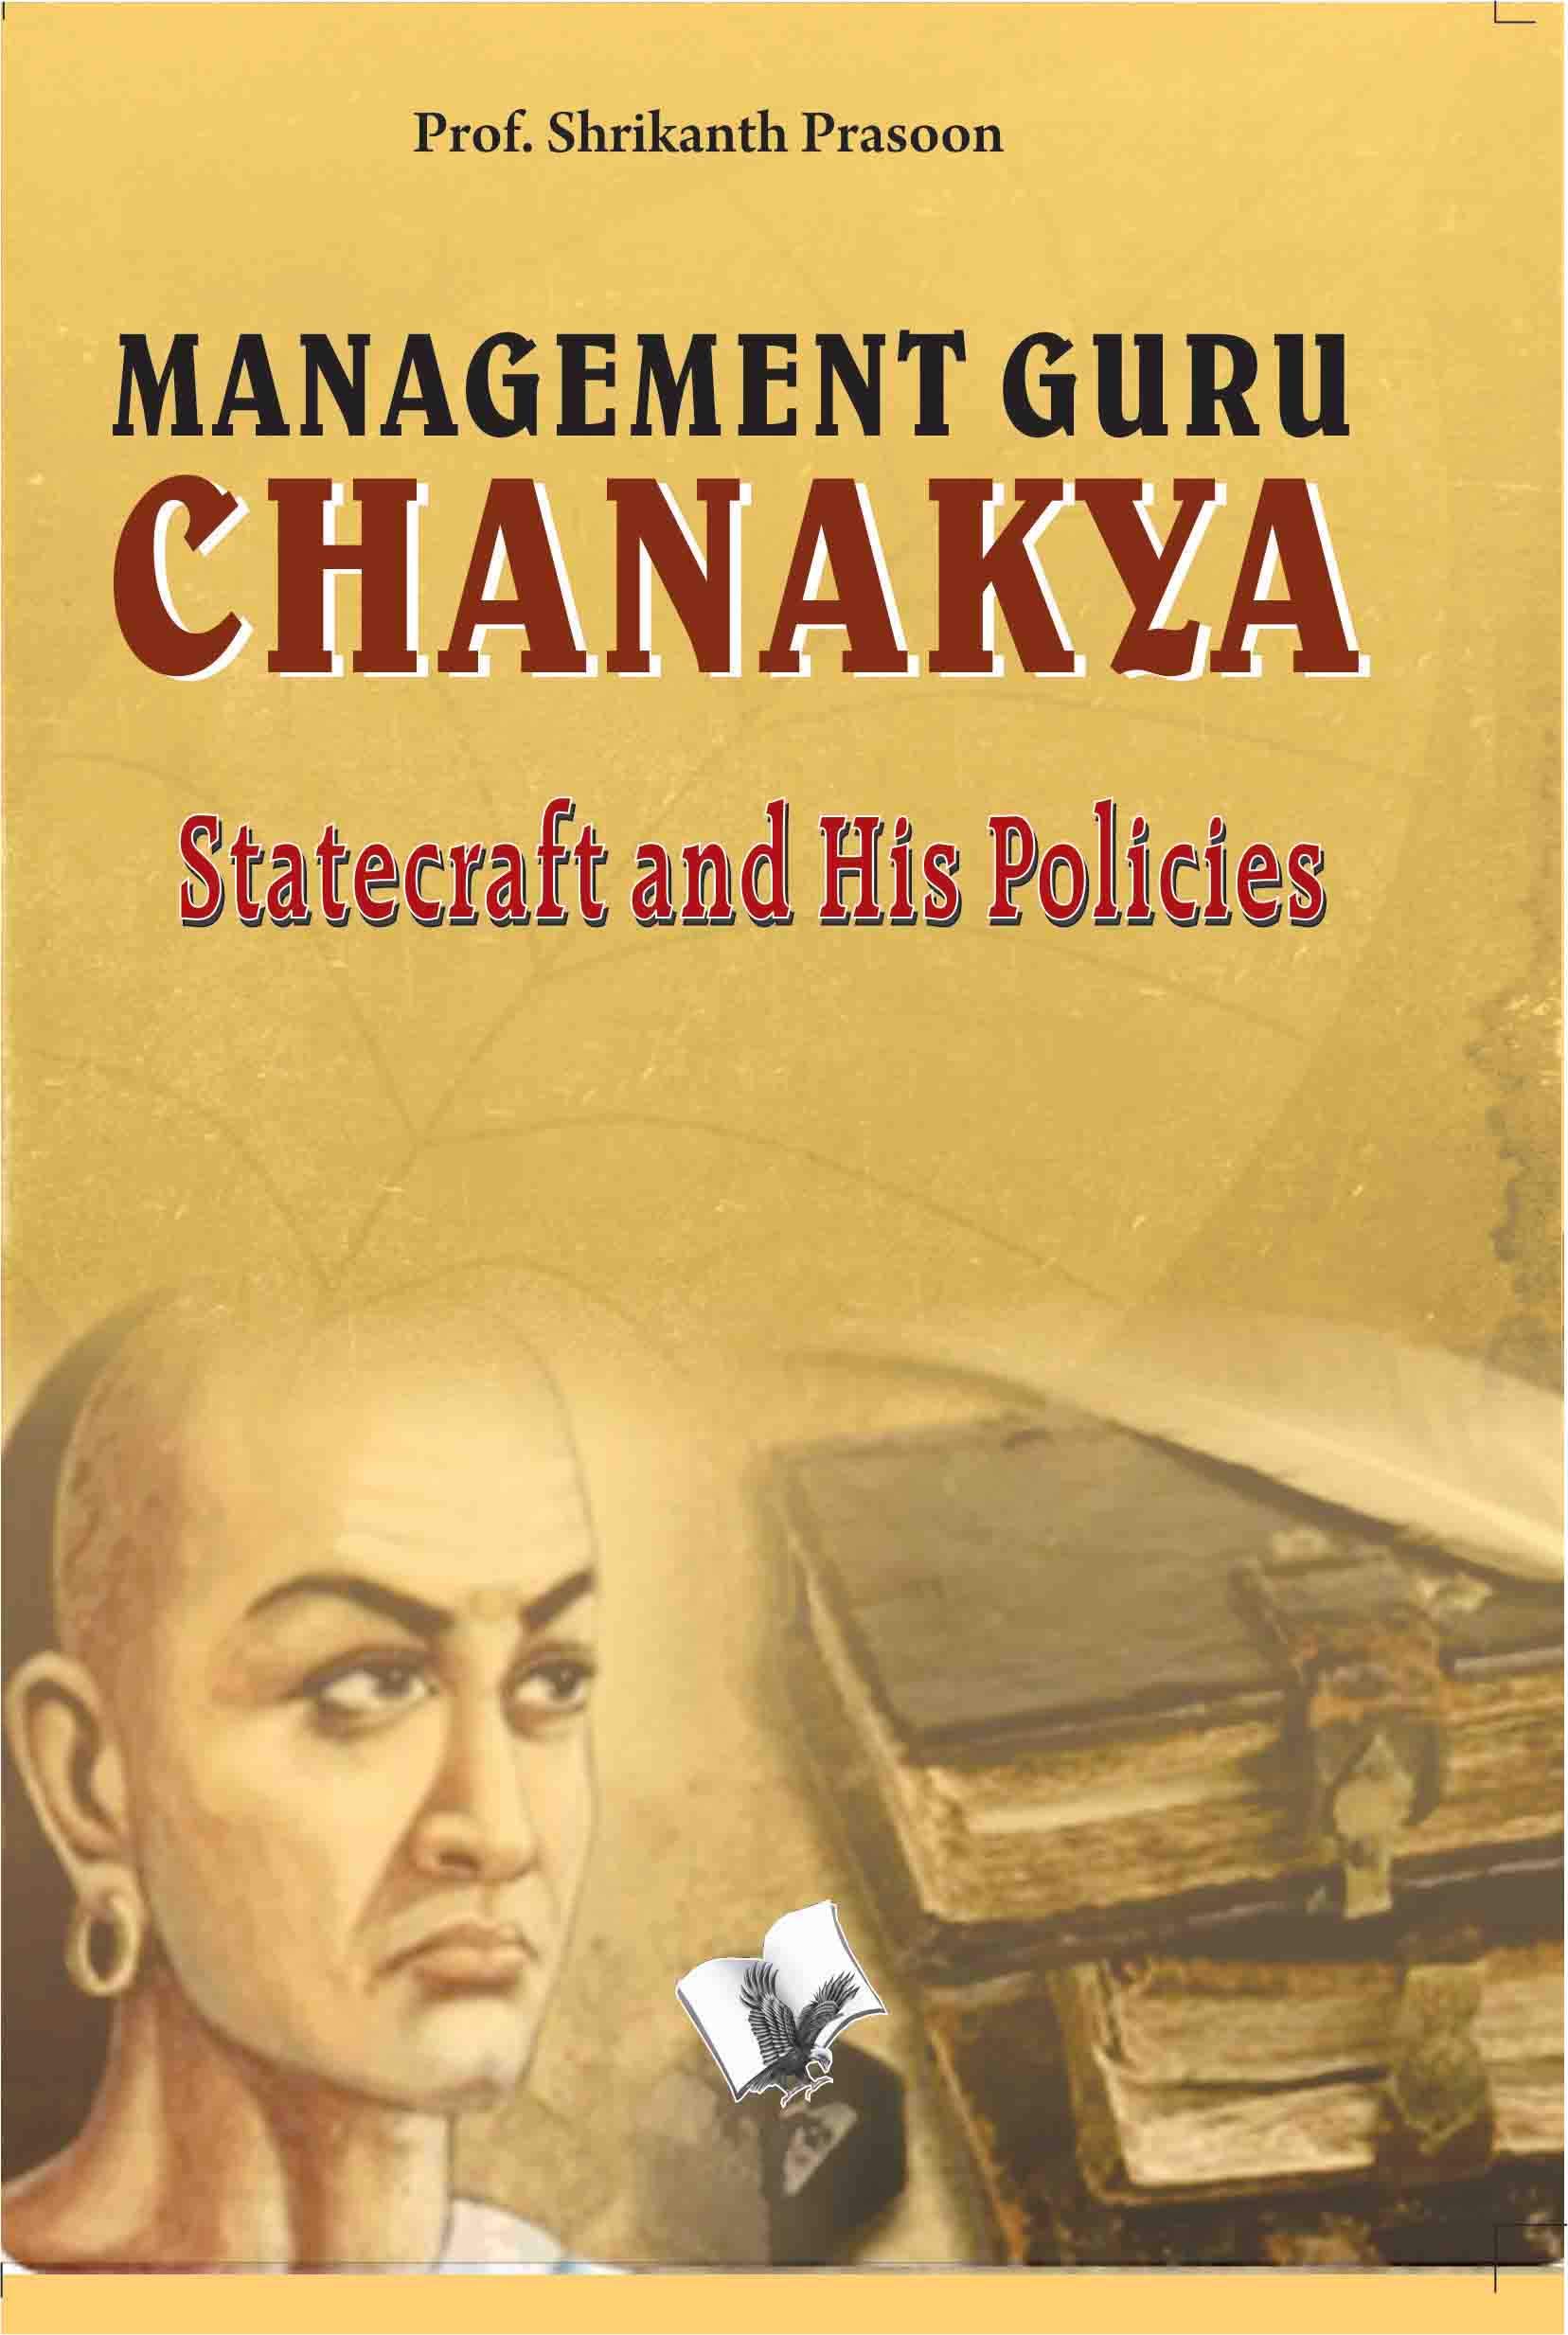 MANAGEMENT GURU CHANAKYA: STATECRAFT AND HIS POLICIES THAT CHANGED THE DESTINY OF INDIA